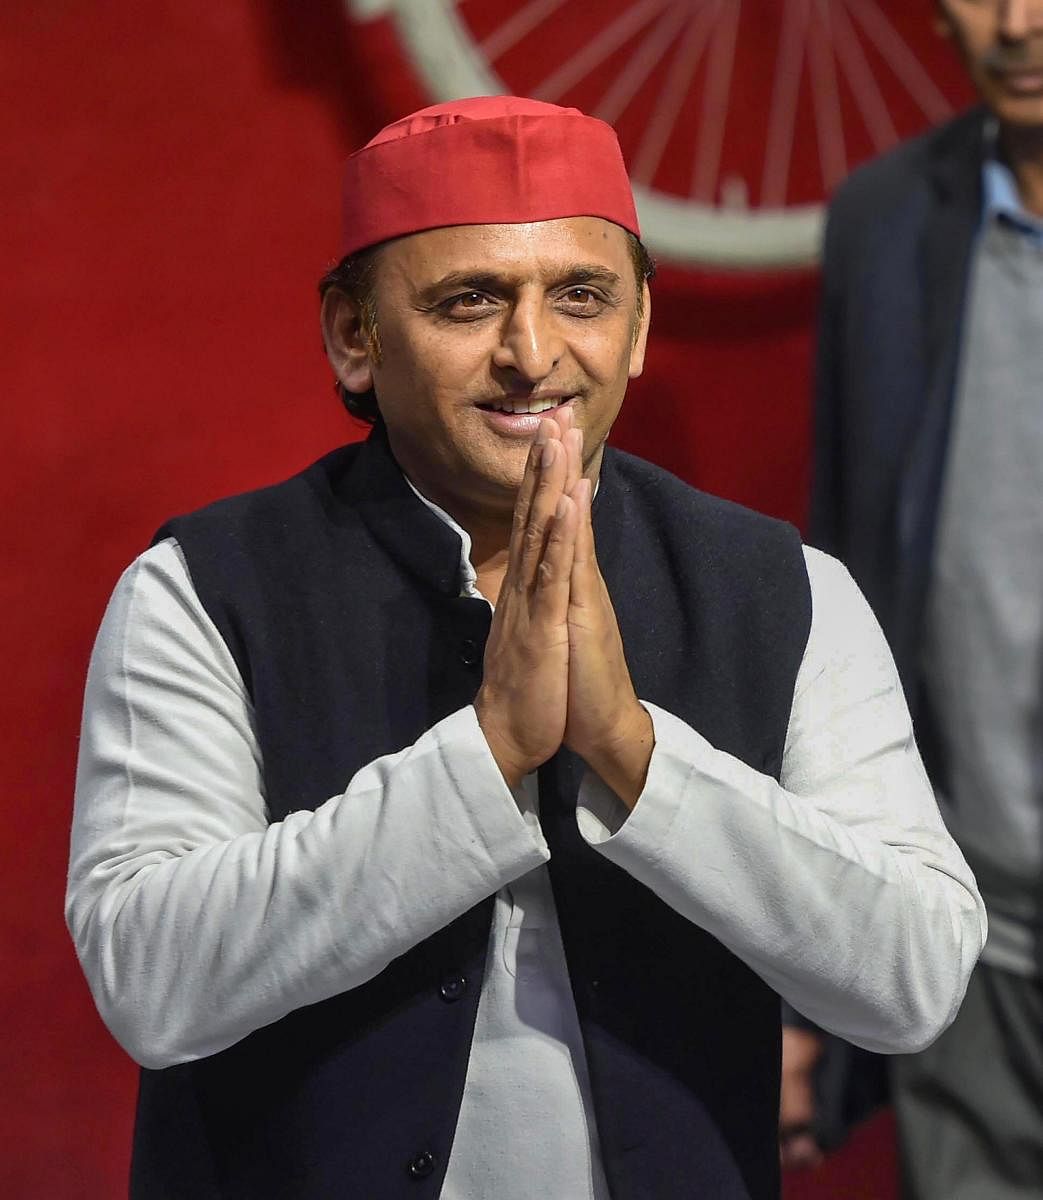 Samajwadi Party (SP) president Akhilesh Yadav on Friday arranged a special screening of her movie 'Chhapaak' for party workers. (PTI File Photo)